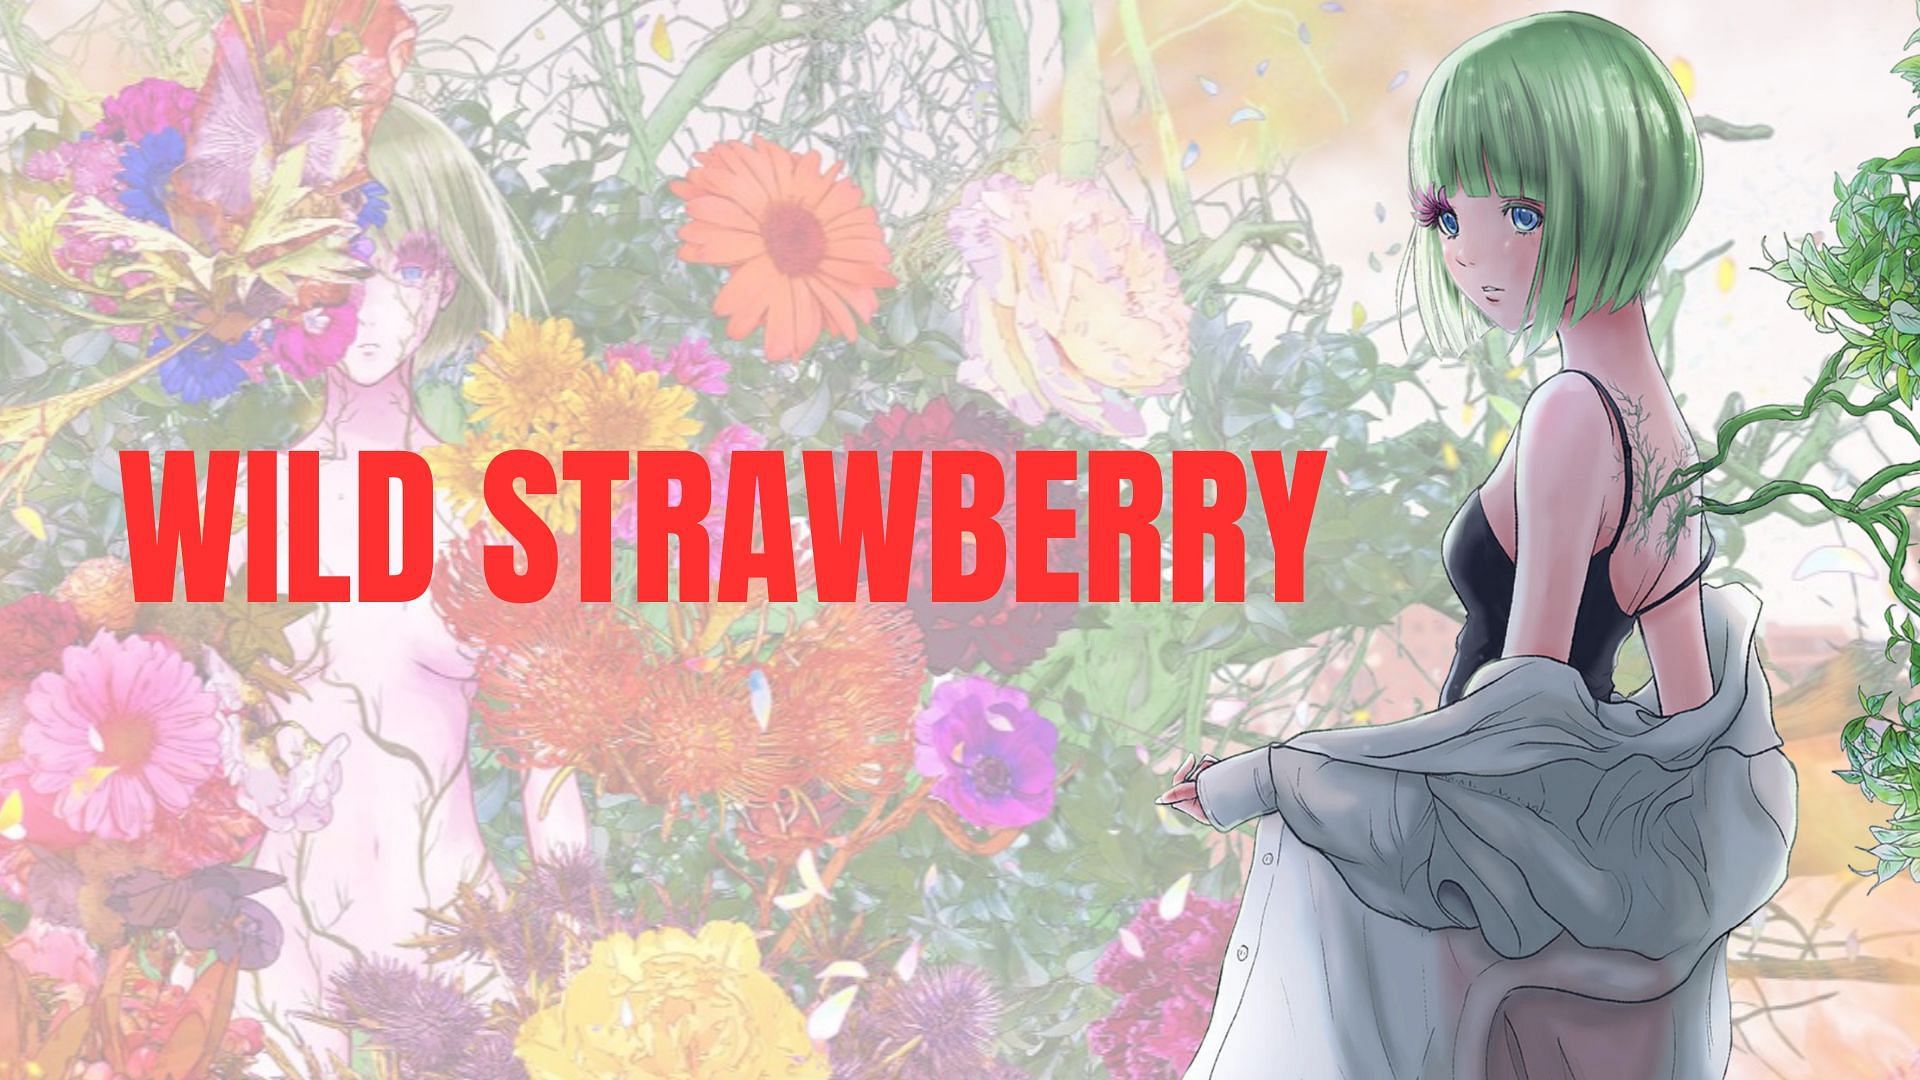 Strawberry Girl - Other & Anime Background Wallpapers on Desktop Nexus  (Image 1612220)